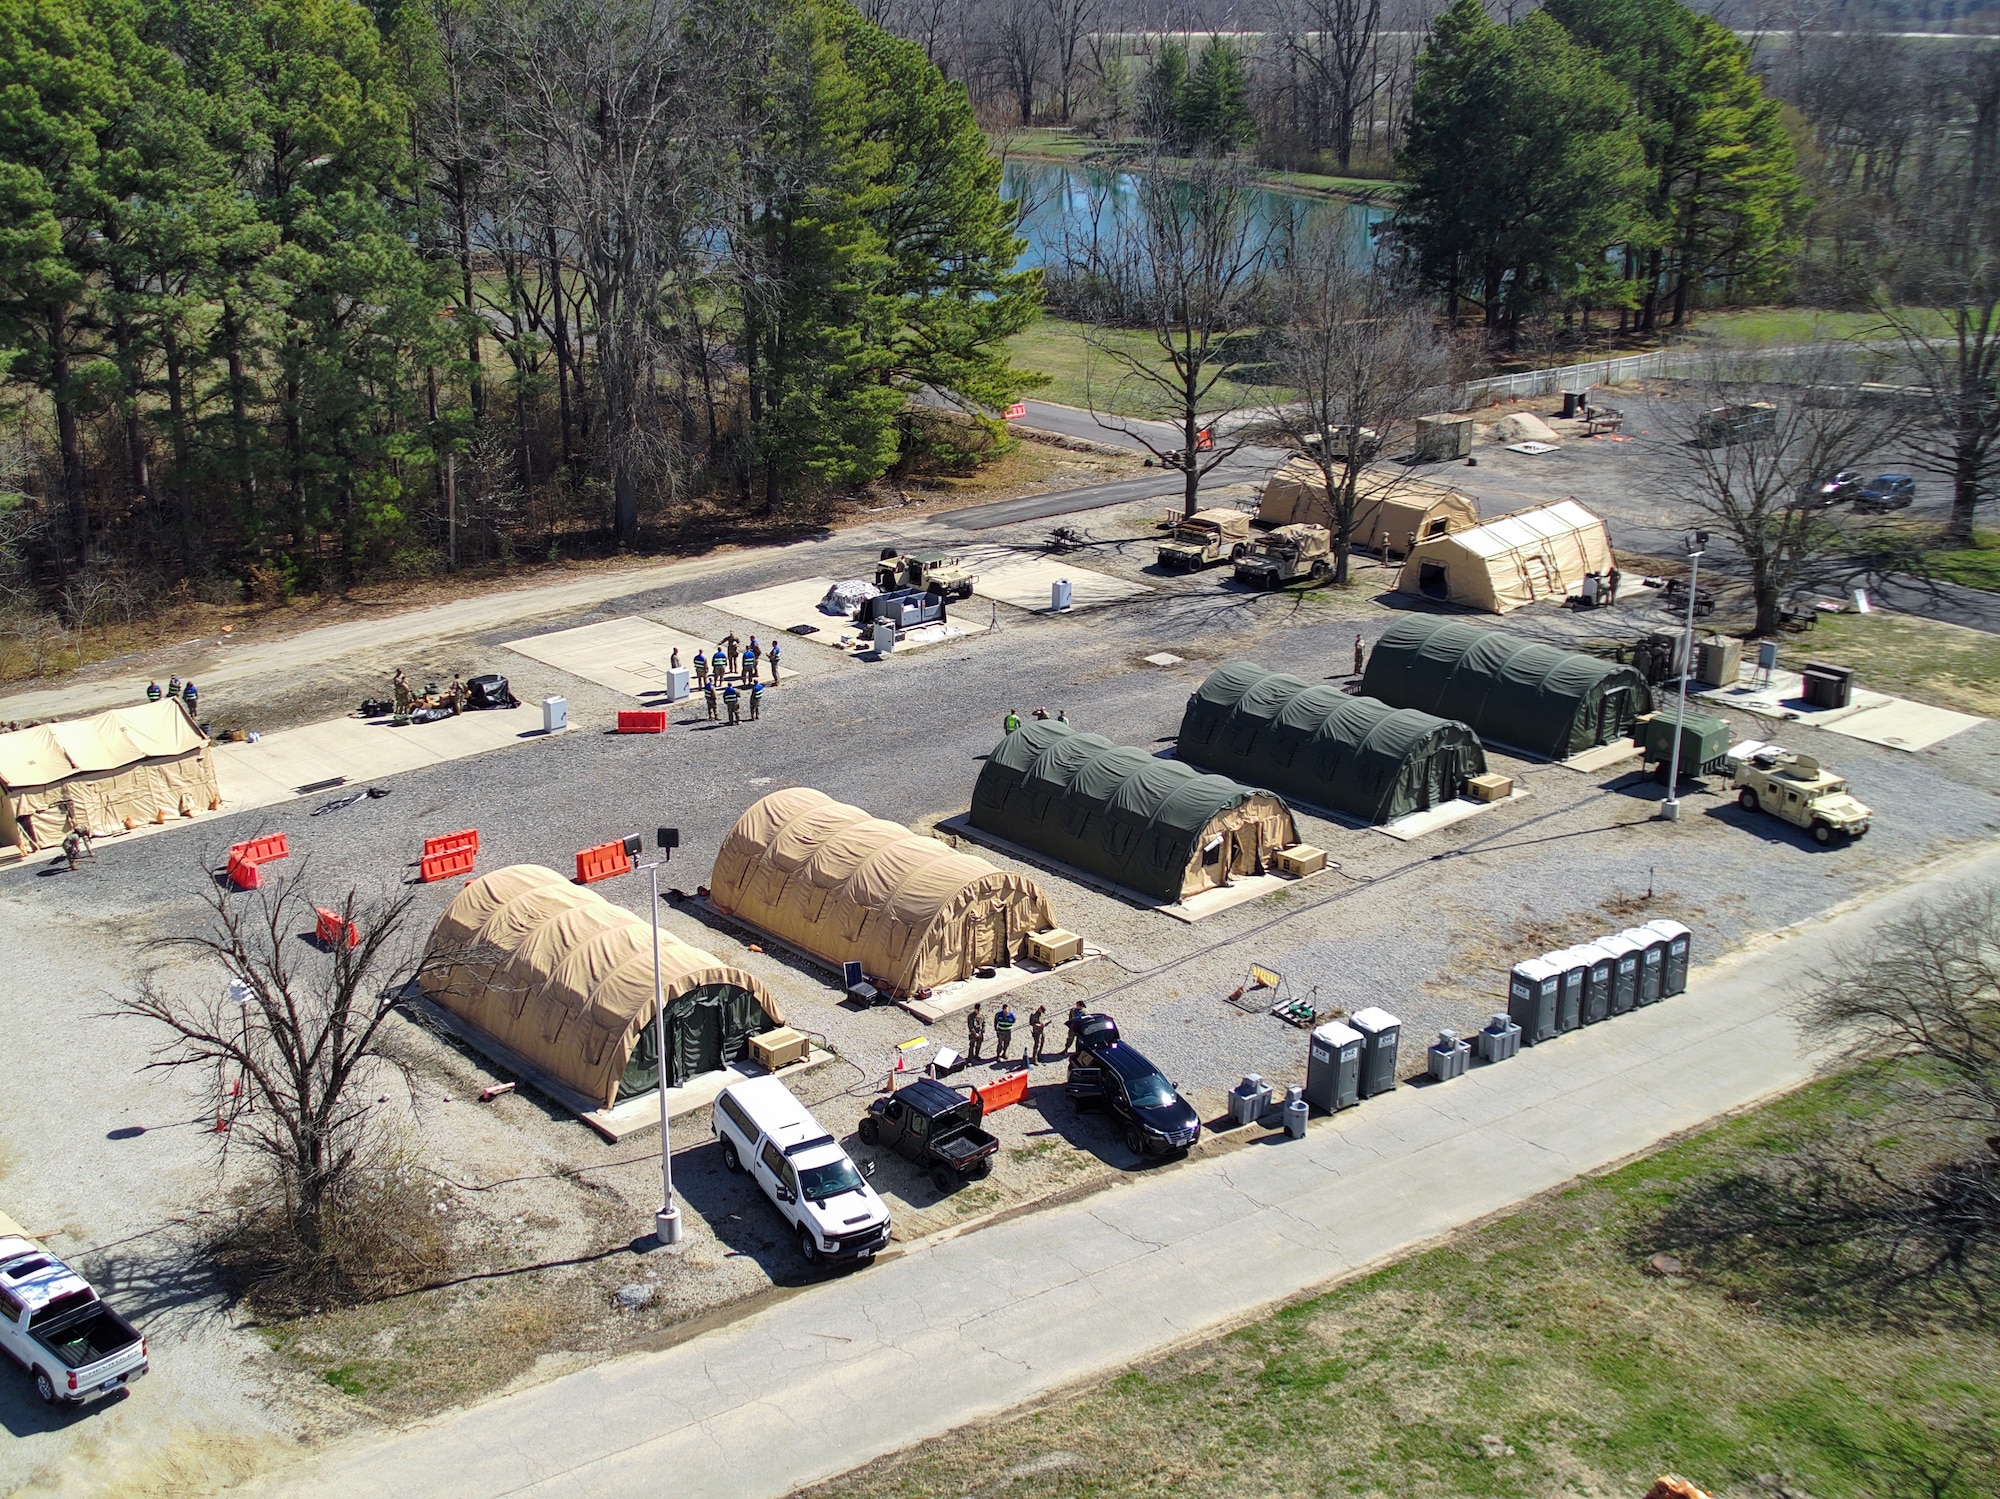 Airmen participate in a combined mobility and mission assurance exercise in the cantonment area with semi-permanent tents.